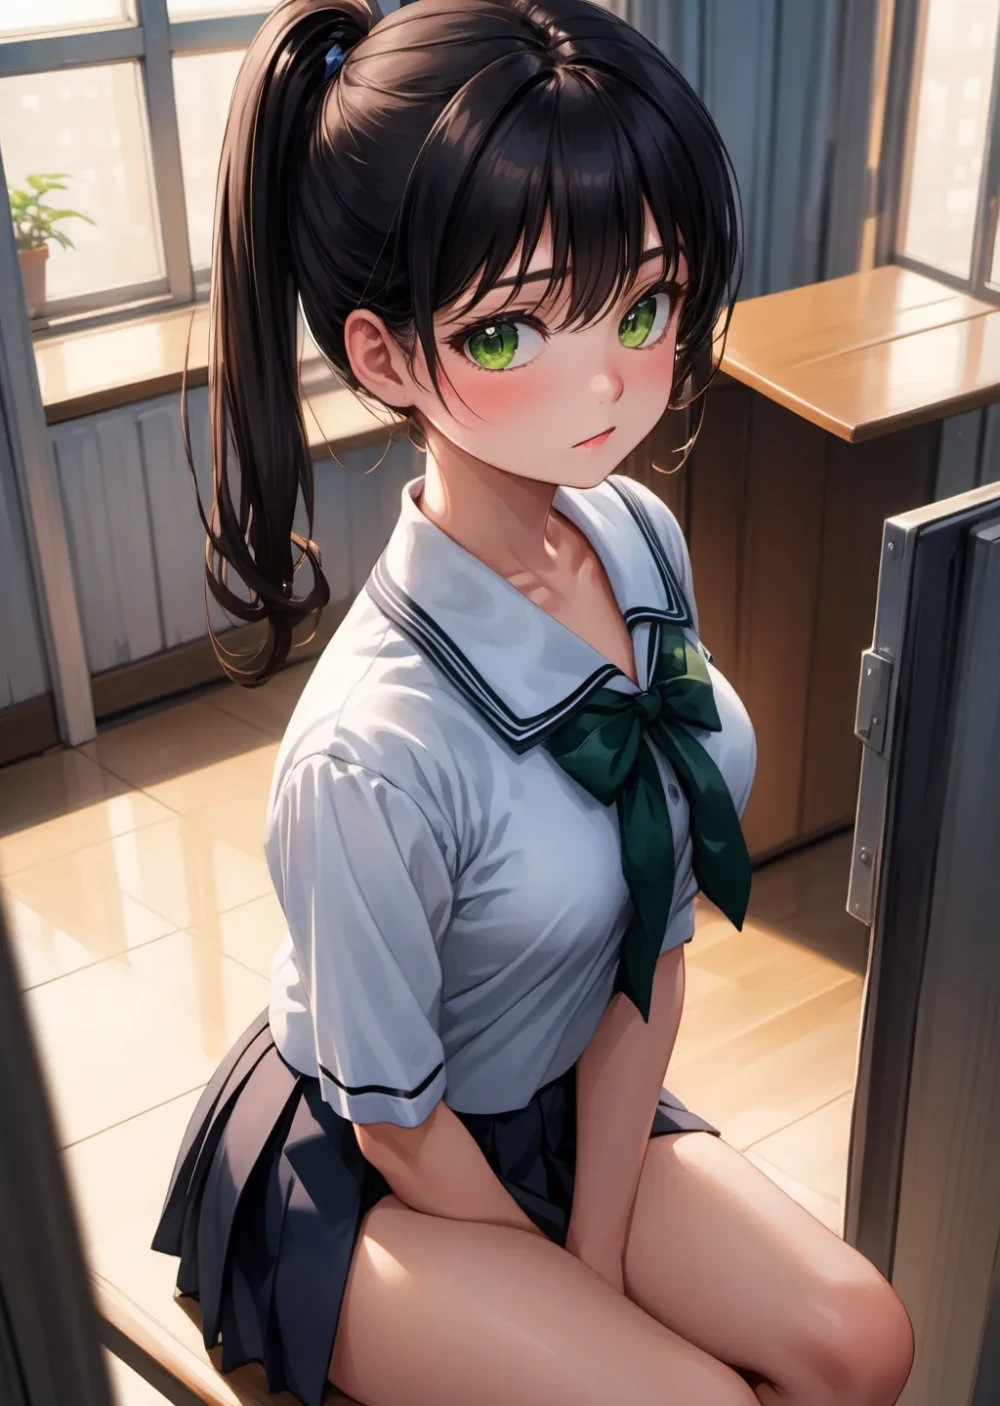 ponytail-anime-style-all-ages-2-2